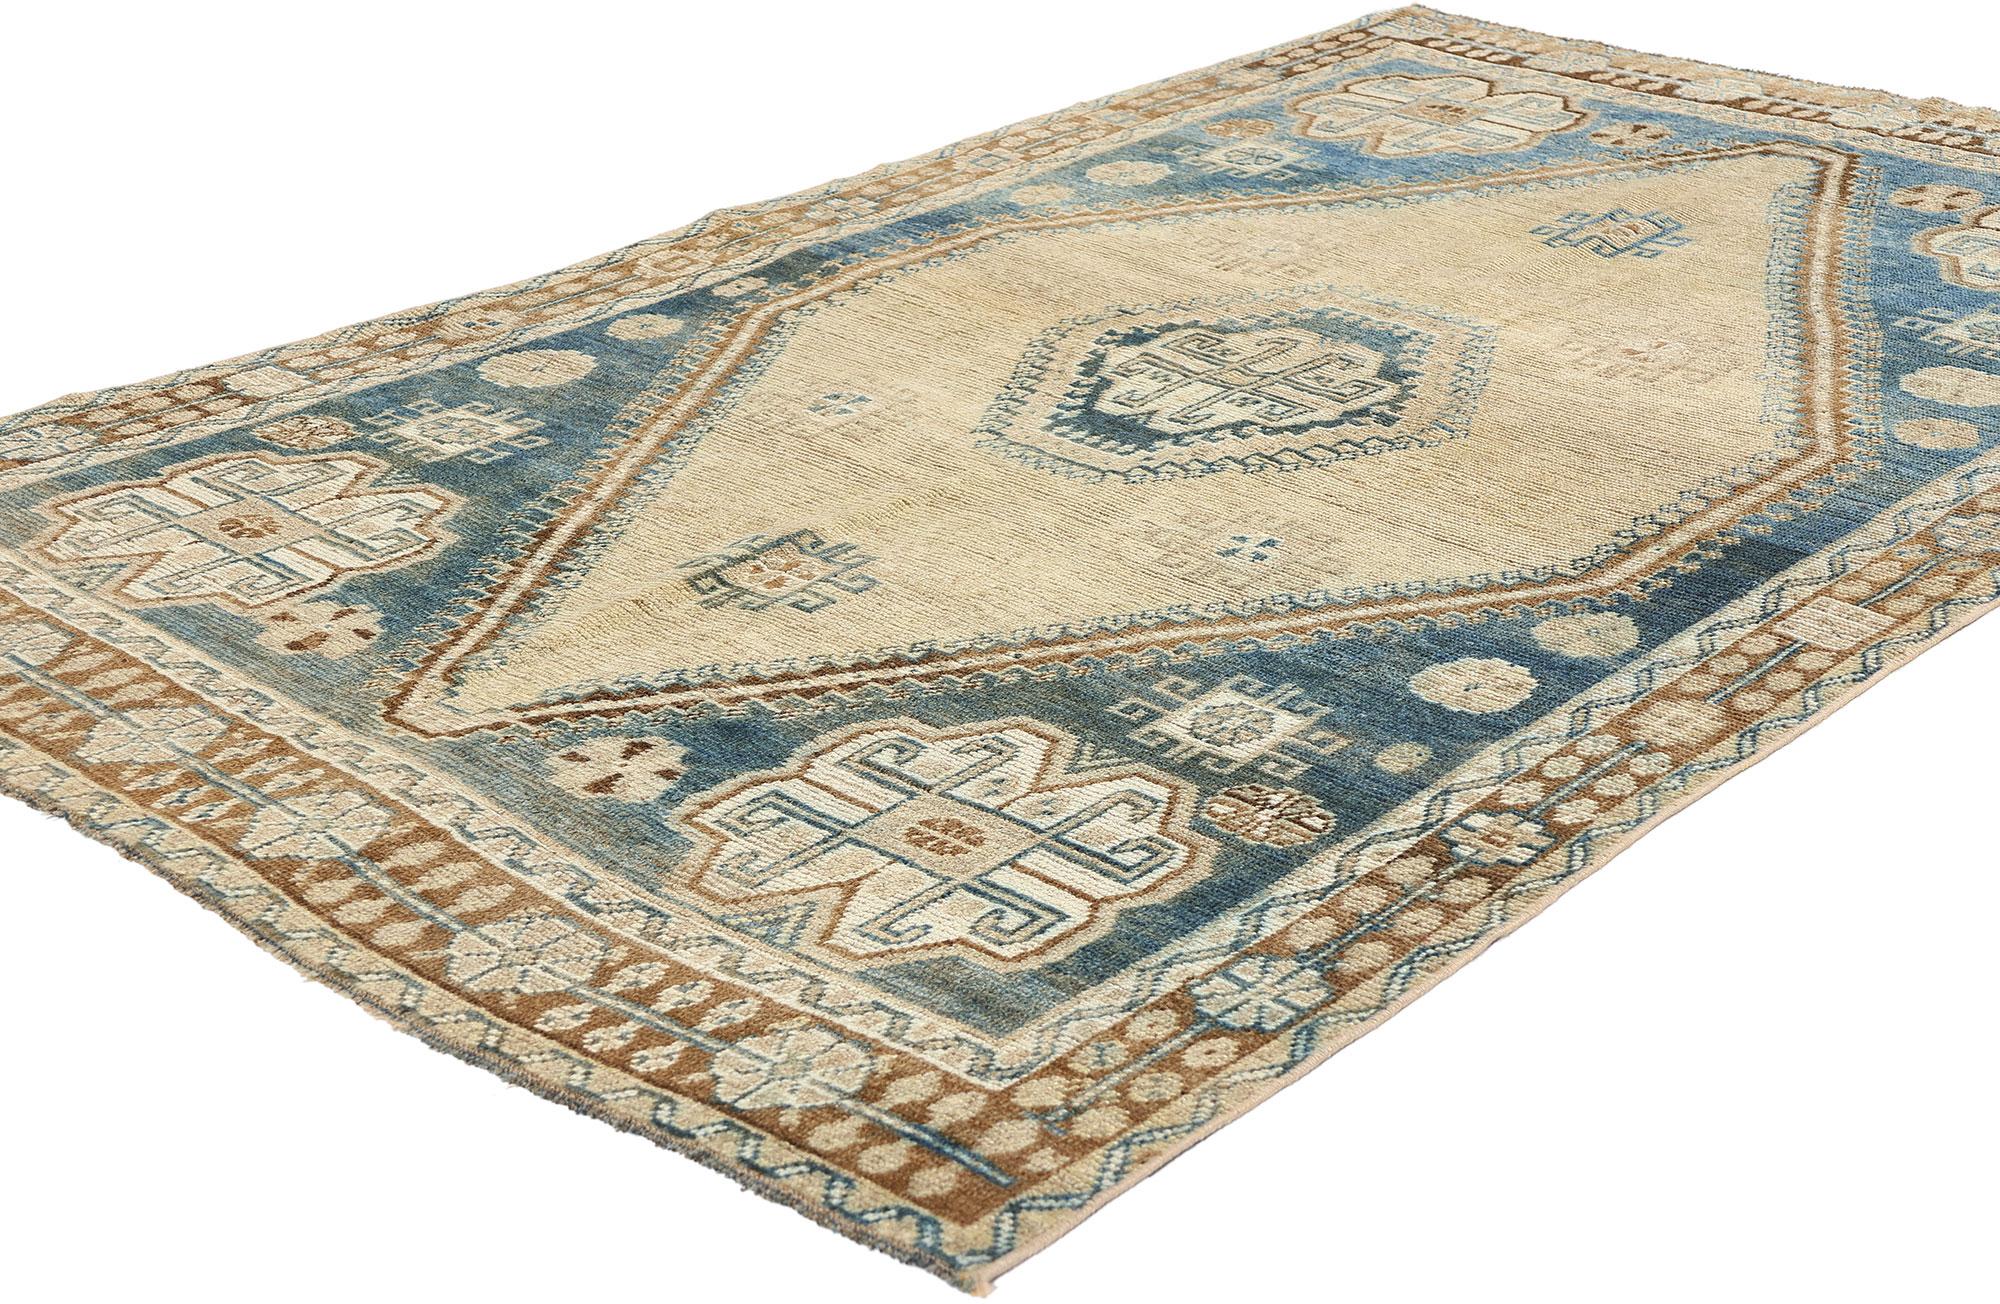 53771 Antique Blue Persian Shiraz Rug, 04'07 x 06'07. Antique-washed Persian Shiraz rugs are a variation of traditional Persian Shiraz rugs that undergo a special washing process to soften their colors and create a faded, worn, or vintage look,